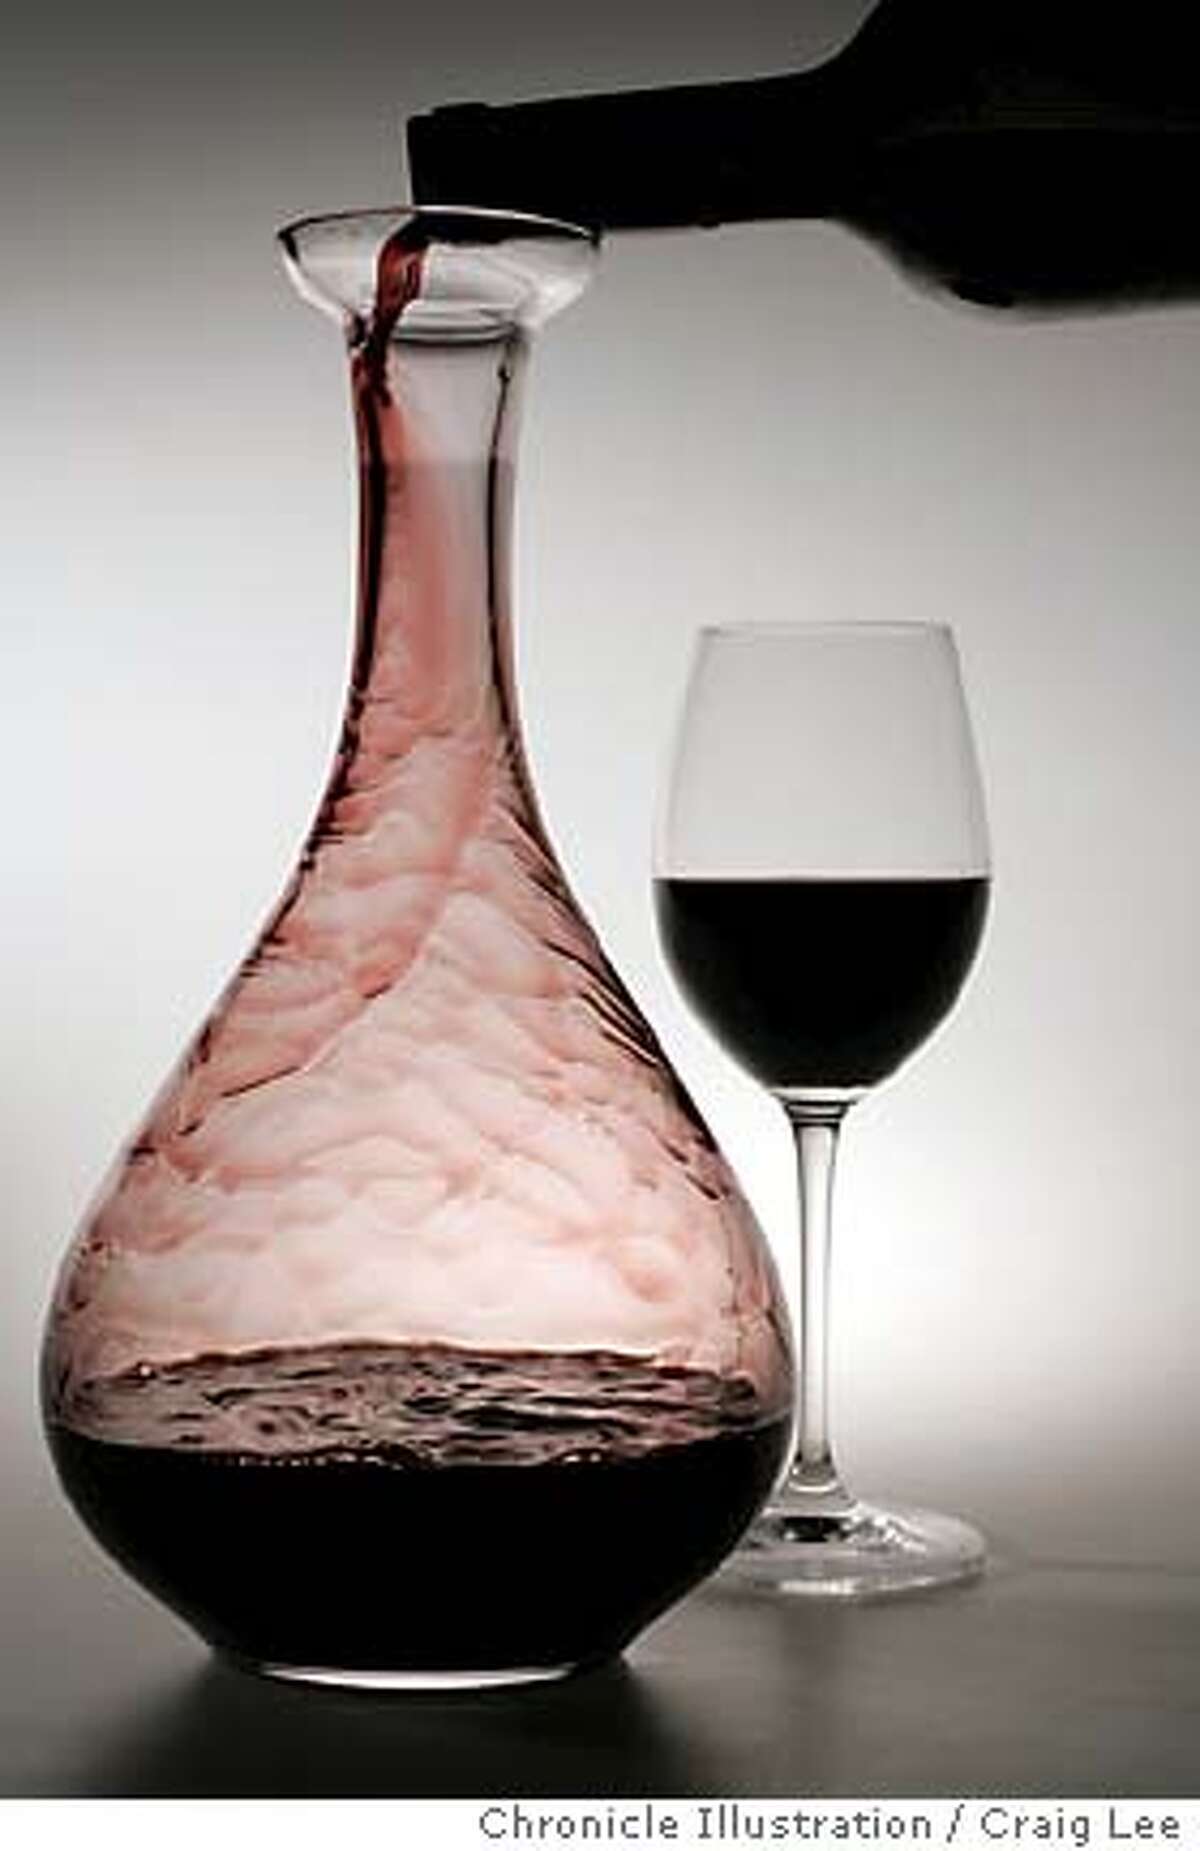 Photo of a wine decanter. Event on 7/5/05 in San Francisco. Craig Lee / The Chronicle